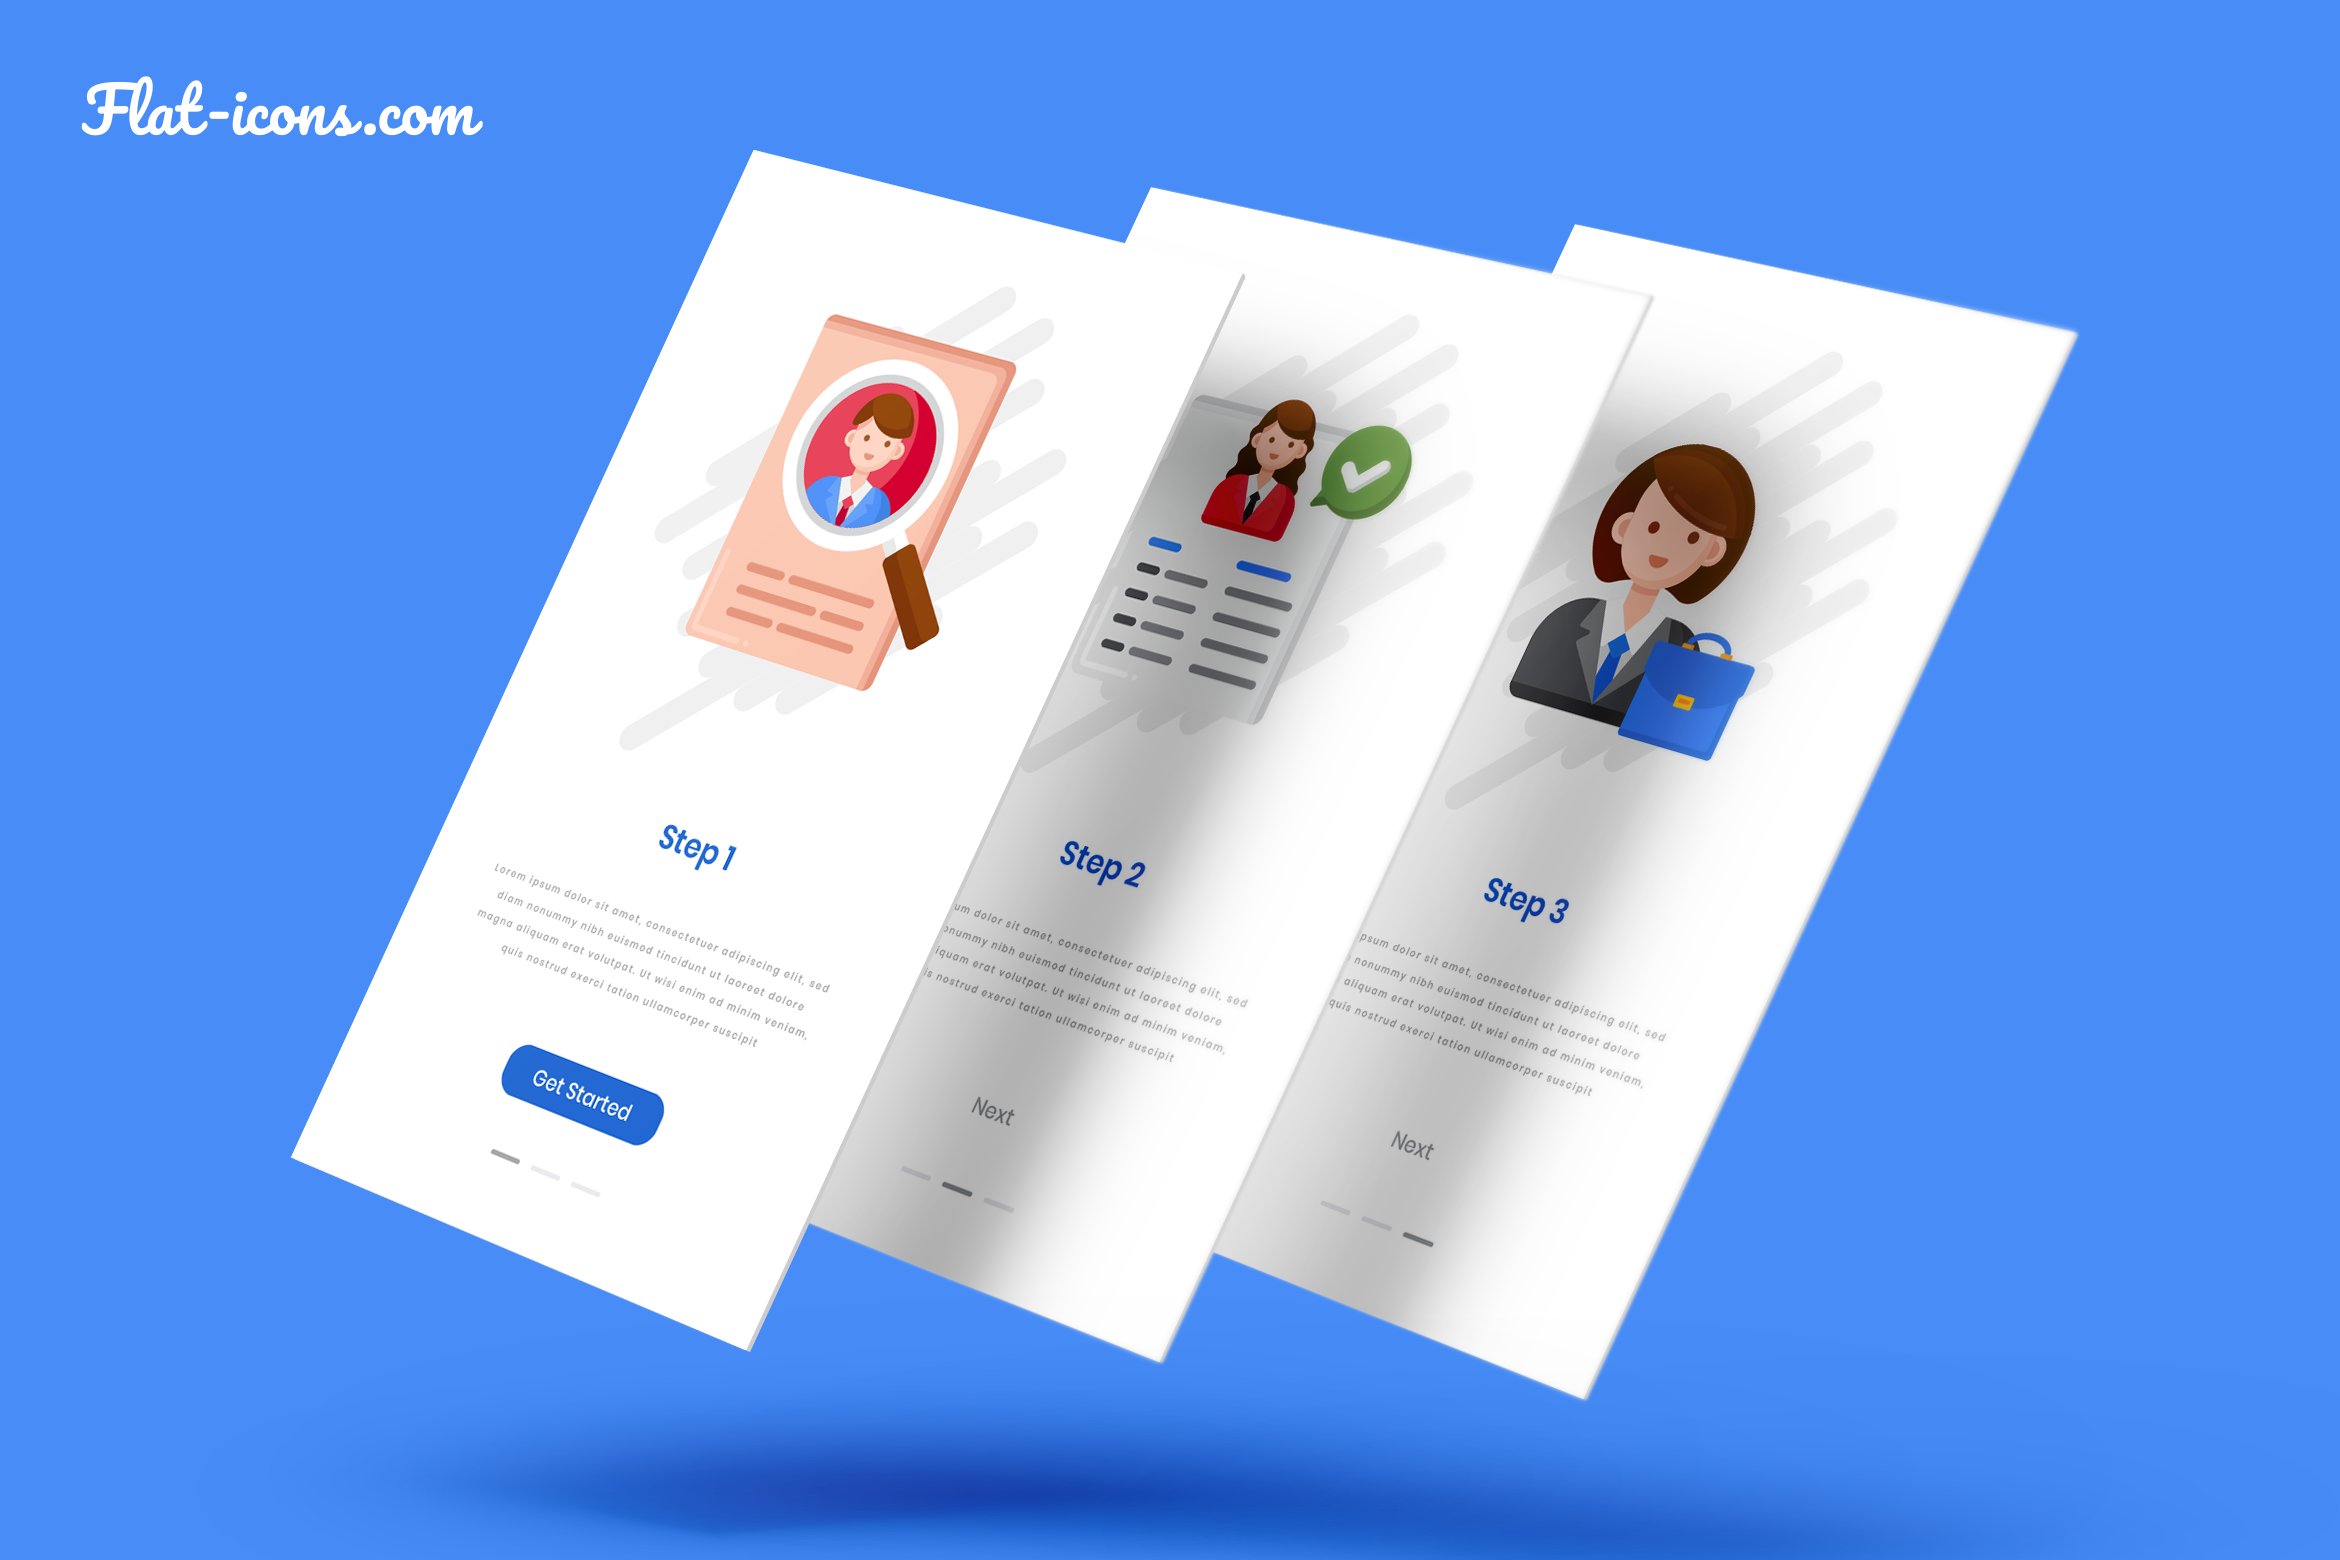 recruitment agency icons rich cm mockup 1 28apps screen float29 716